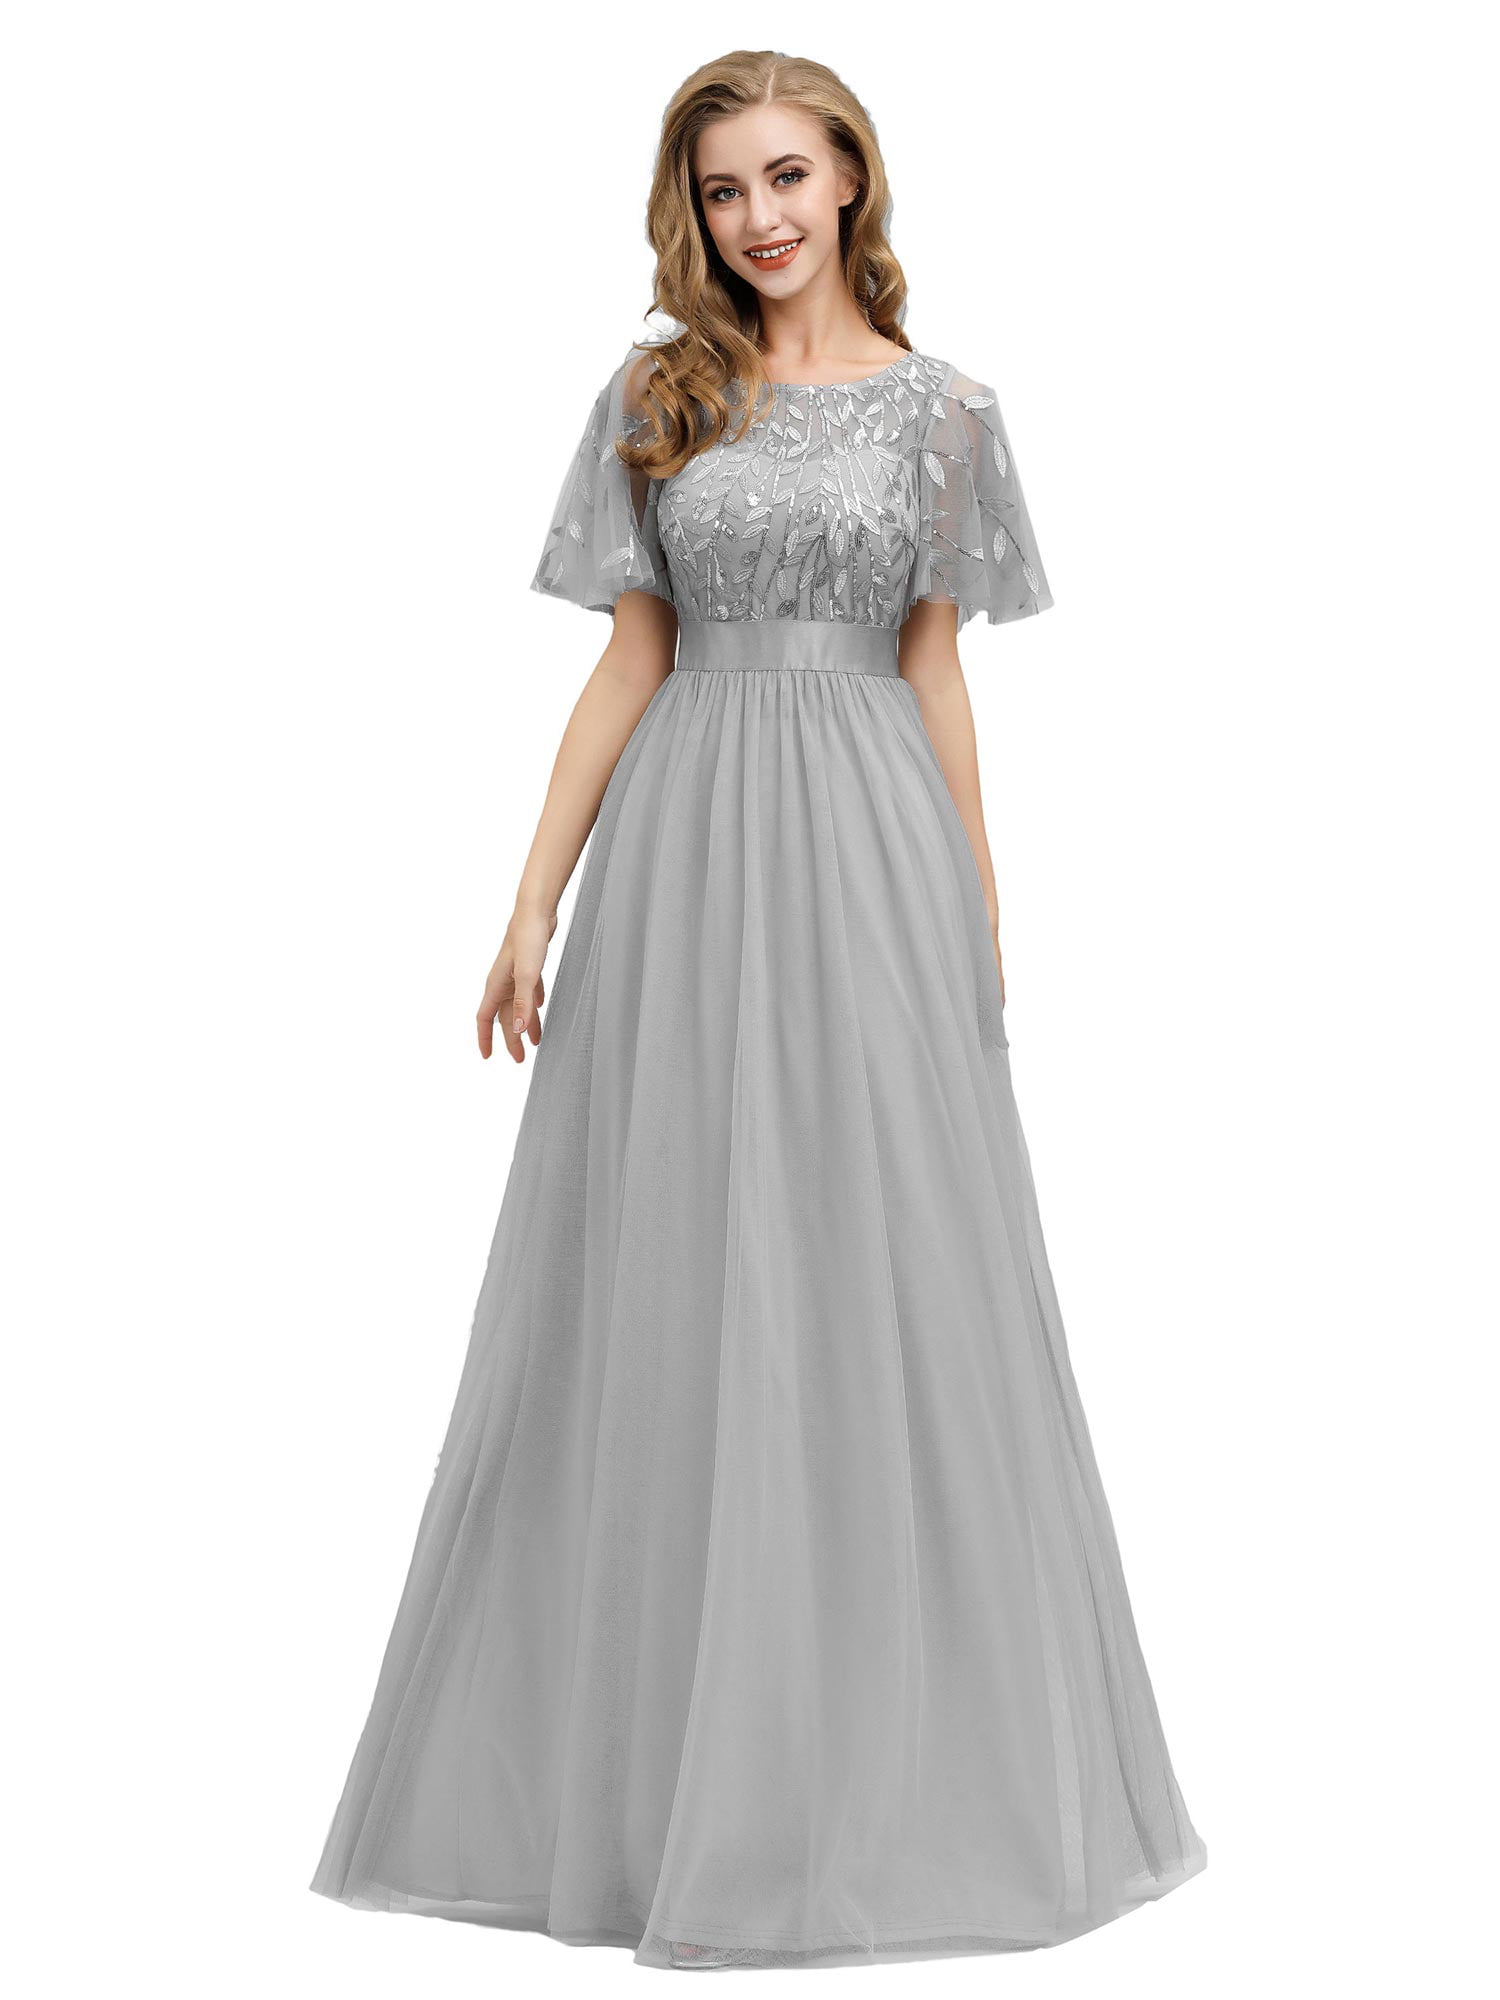 gray formal gown